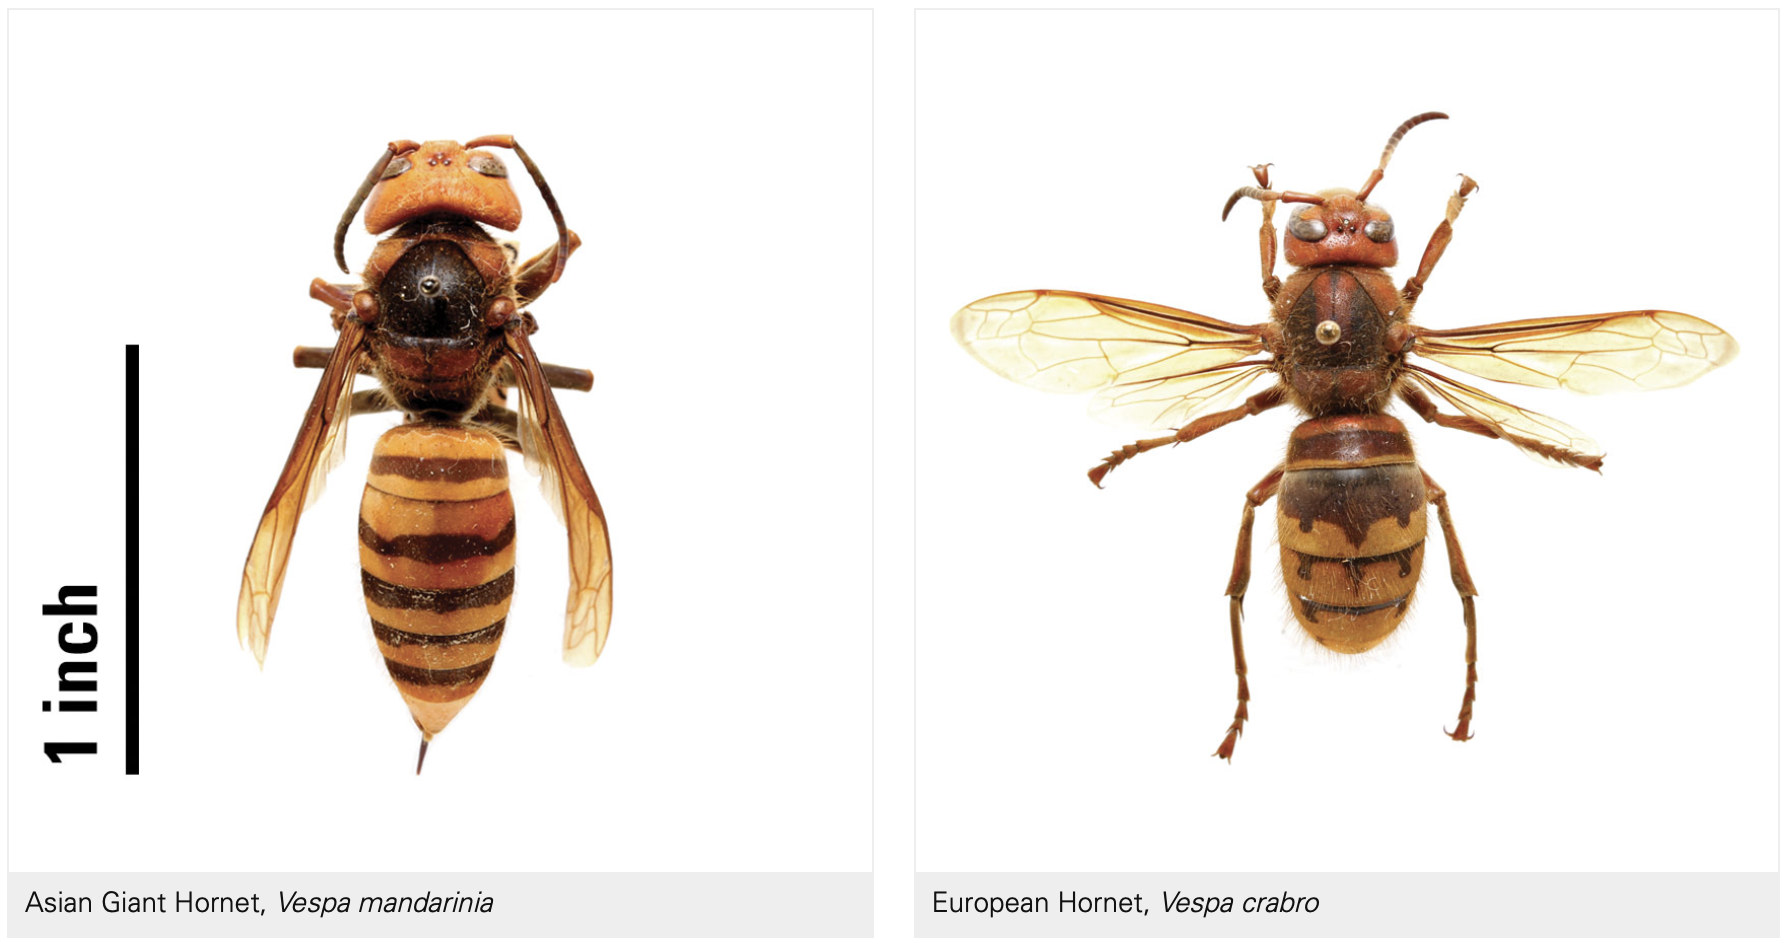 Asian_vs_European.png- European hornets (featured on the right) are brown with wide yellow markings with a reddish-brown head. Asian Hornets (featured on the left) have large, yellow heads with small eyes. Their stripes are even without the dot-like accents.